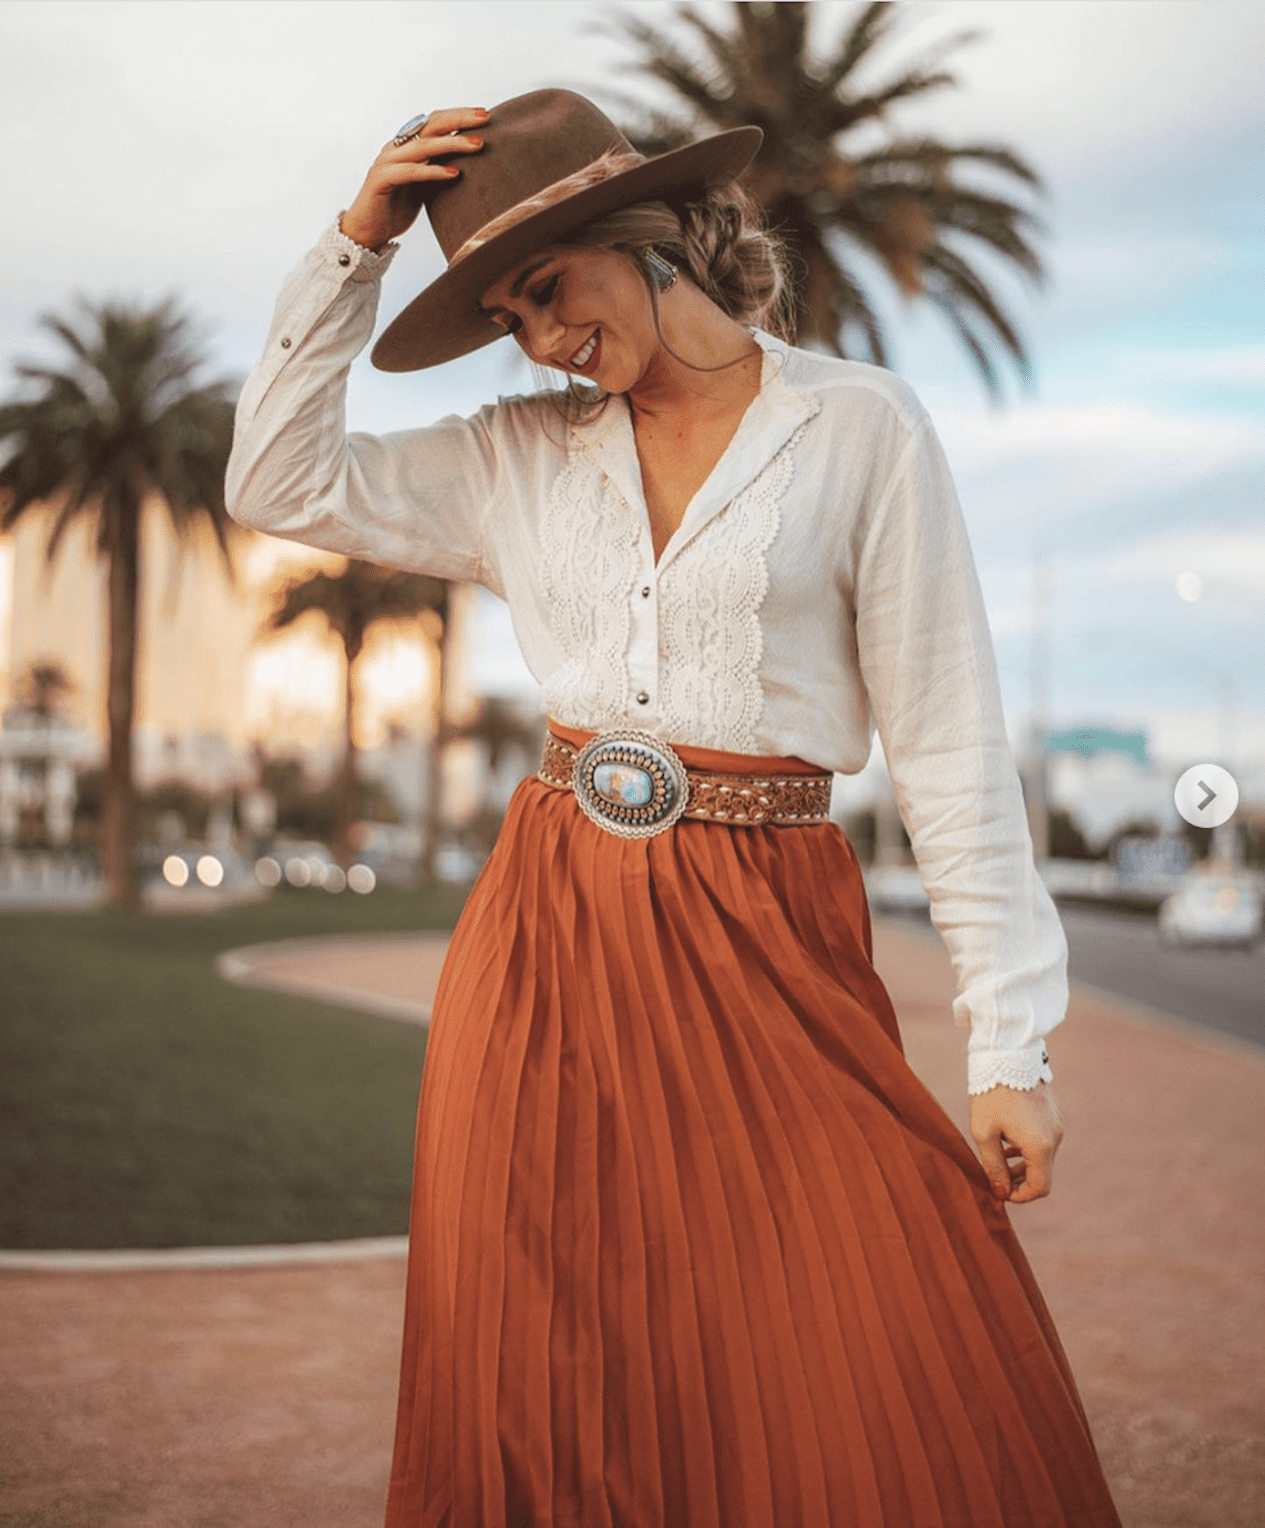 If you're wearing a cowboy hat with a skirt, pair it with a blouse and sandals.